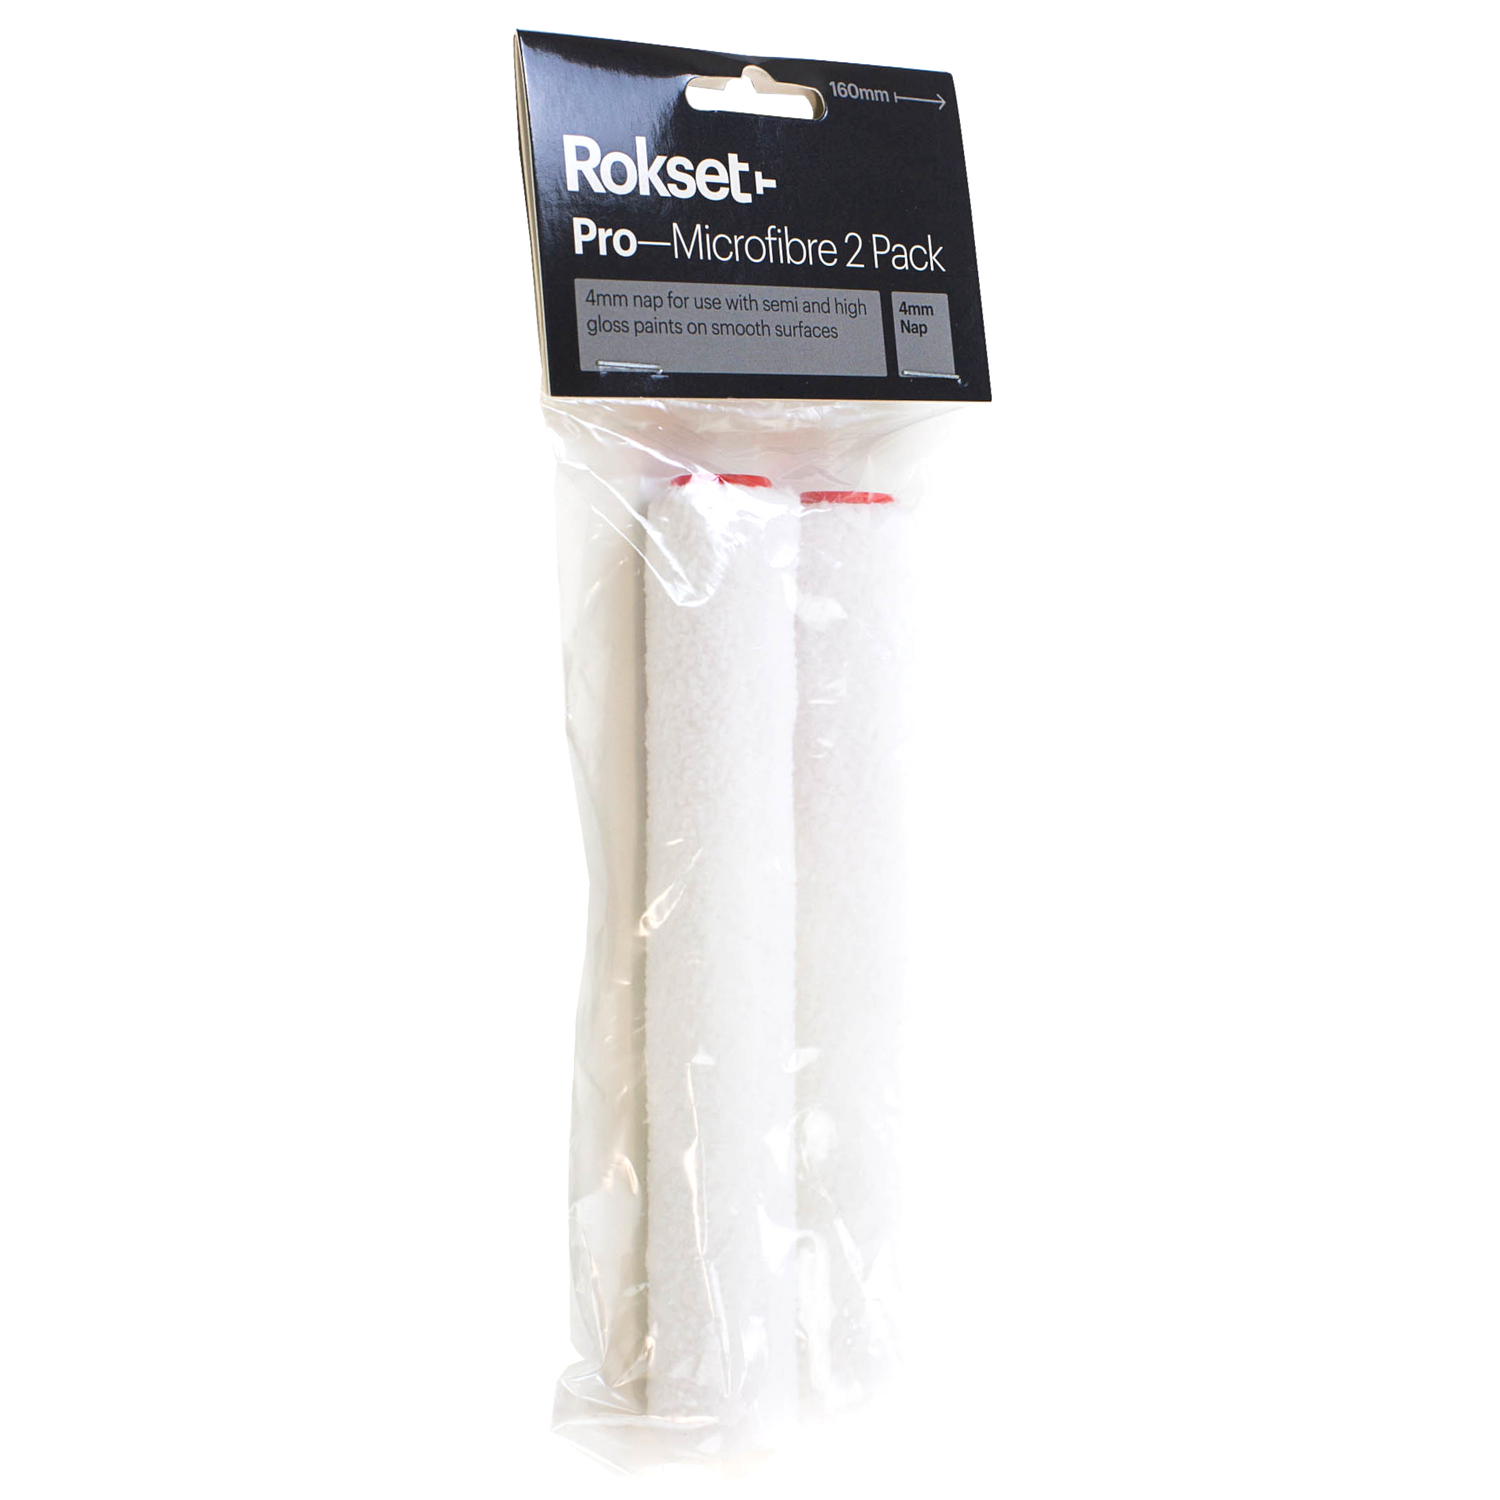 Sequence Pro Microfibre 4mm Roller Covers 160mm (2pack) - Crockers Paint & Wallpaper